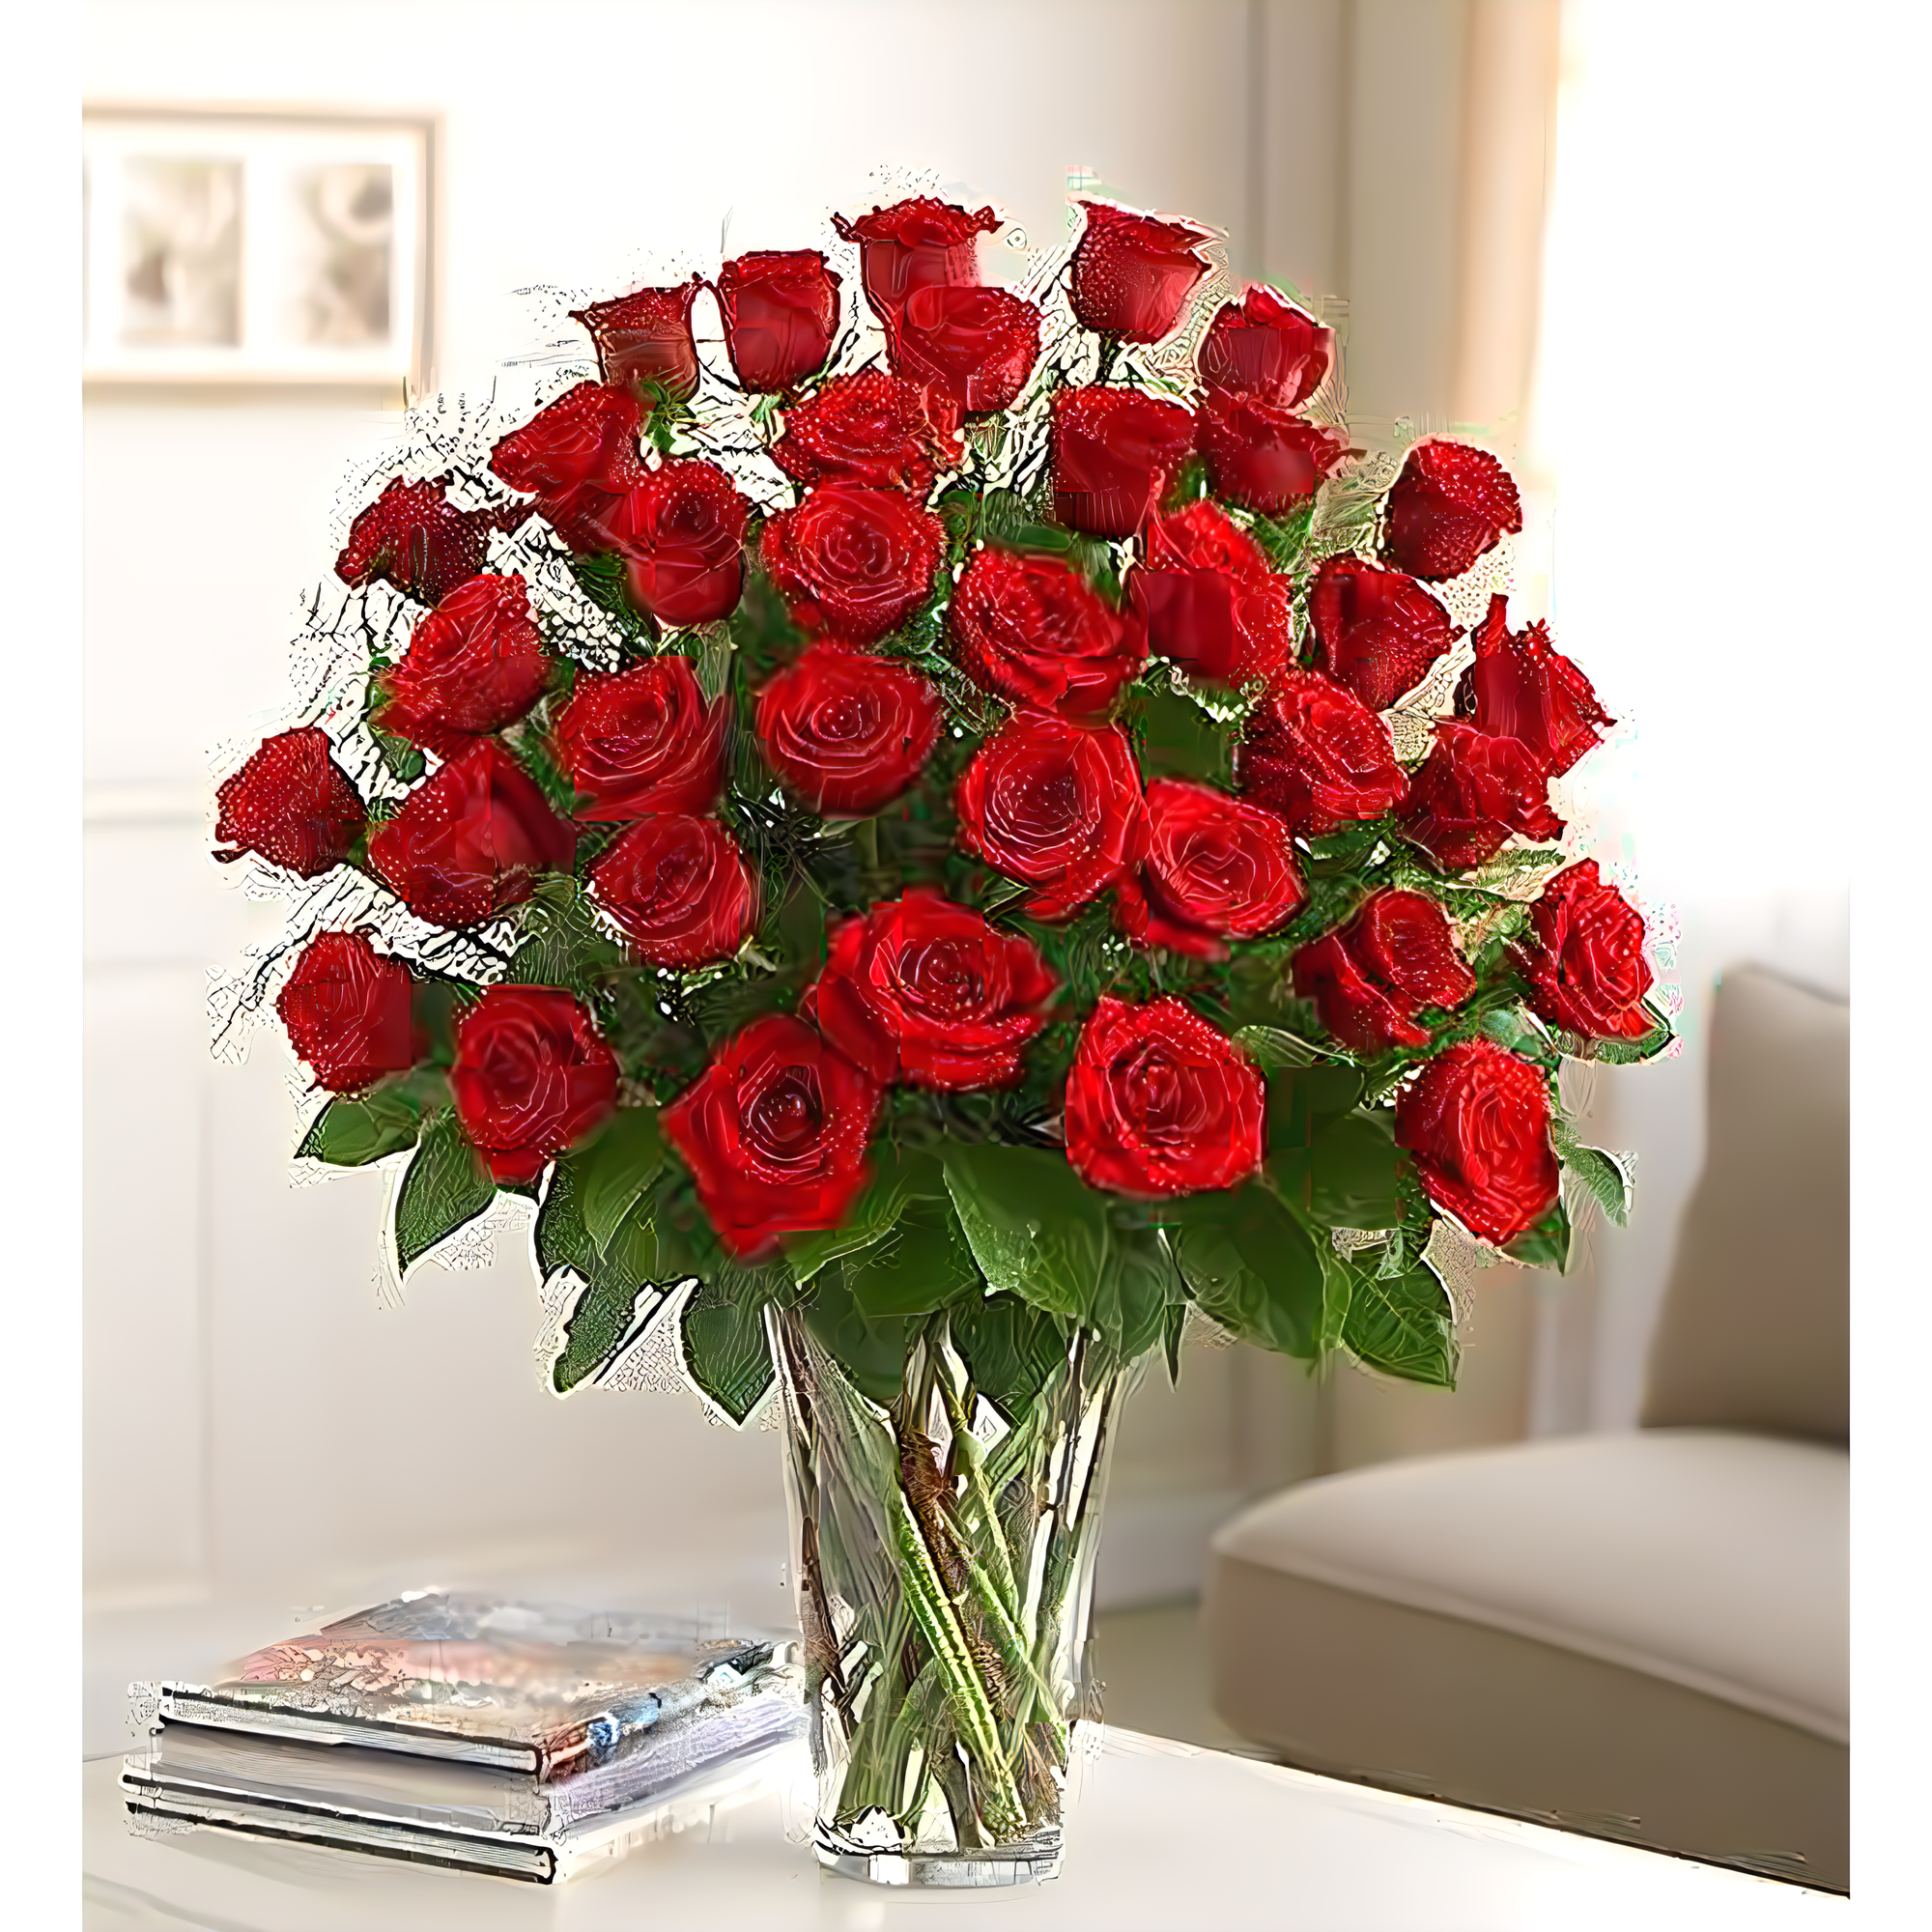 Manhattan Flower Delivery - Three Dozen Roses for Sympathy - Funeral > For the Service